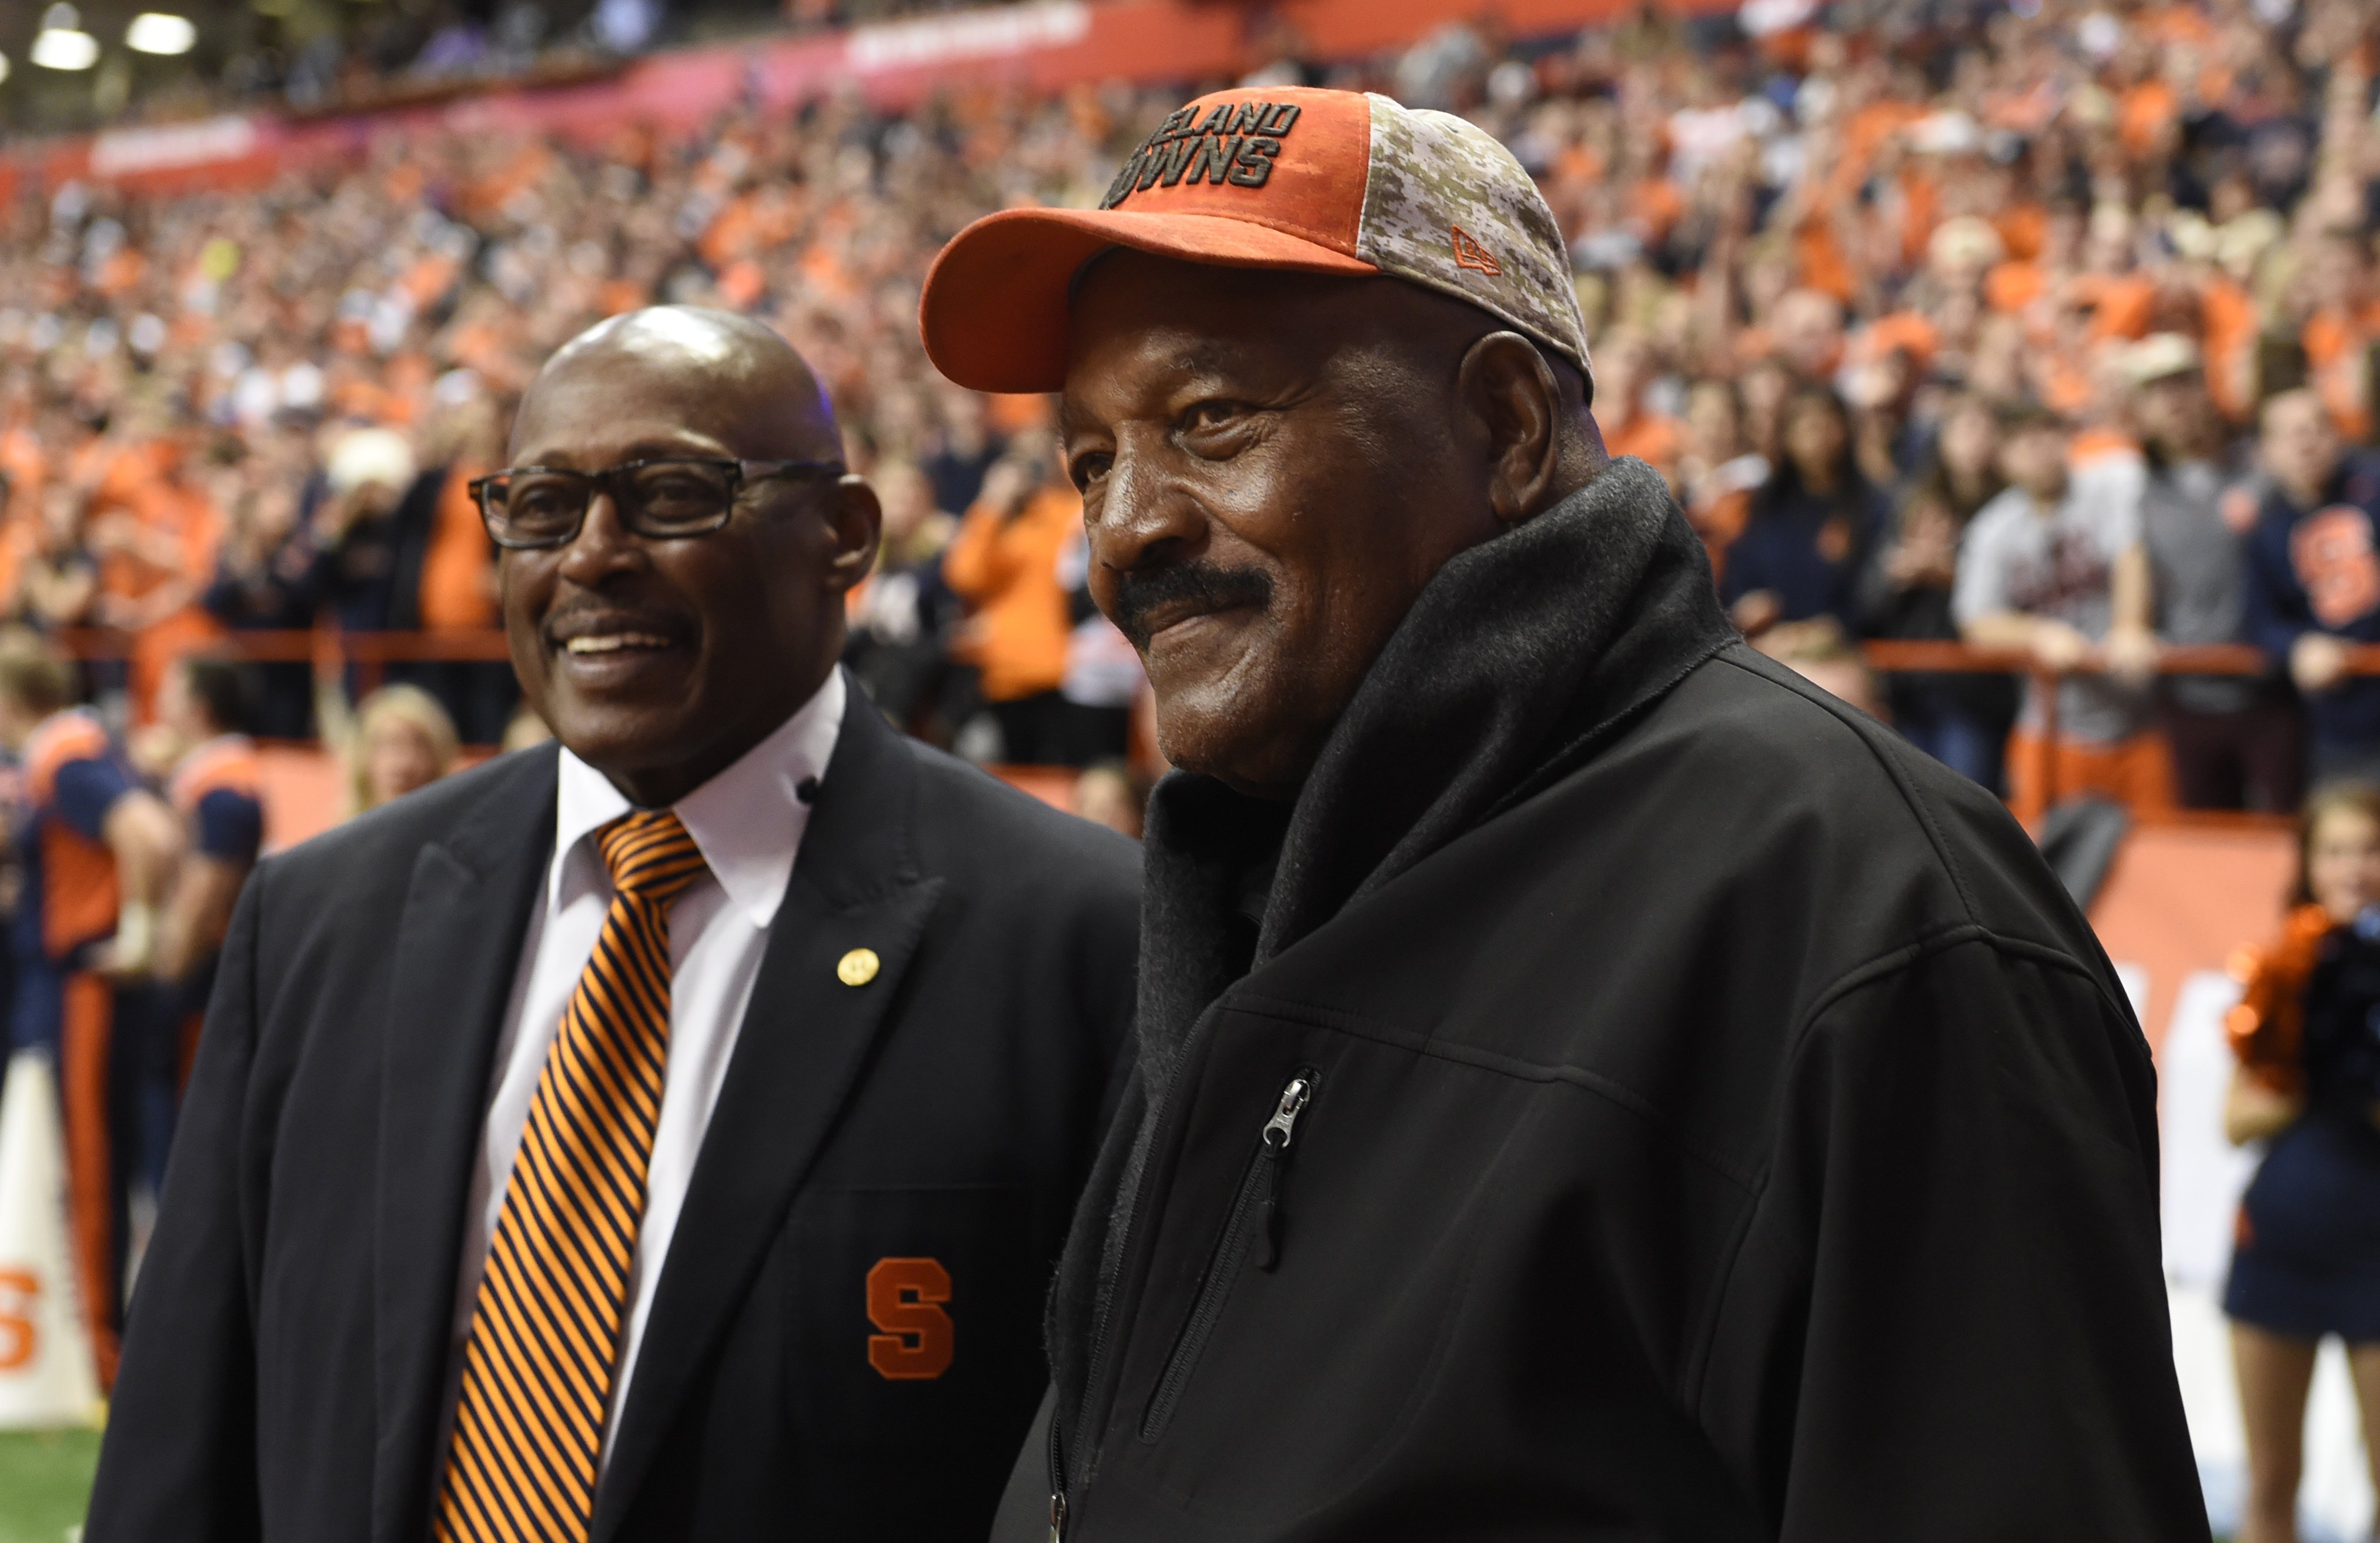 Syracuse football legends Floyd Little and Jim Brown were honored after the first quarter of the Syracuse Clemson Game at the Carrier Dome, Nov. 14, 2015. Dennis Nett | dnett@syracuse.com